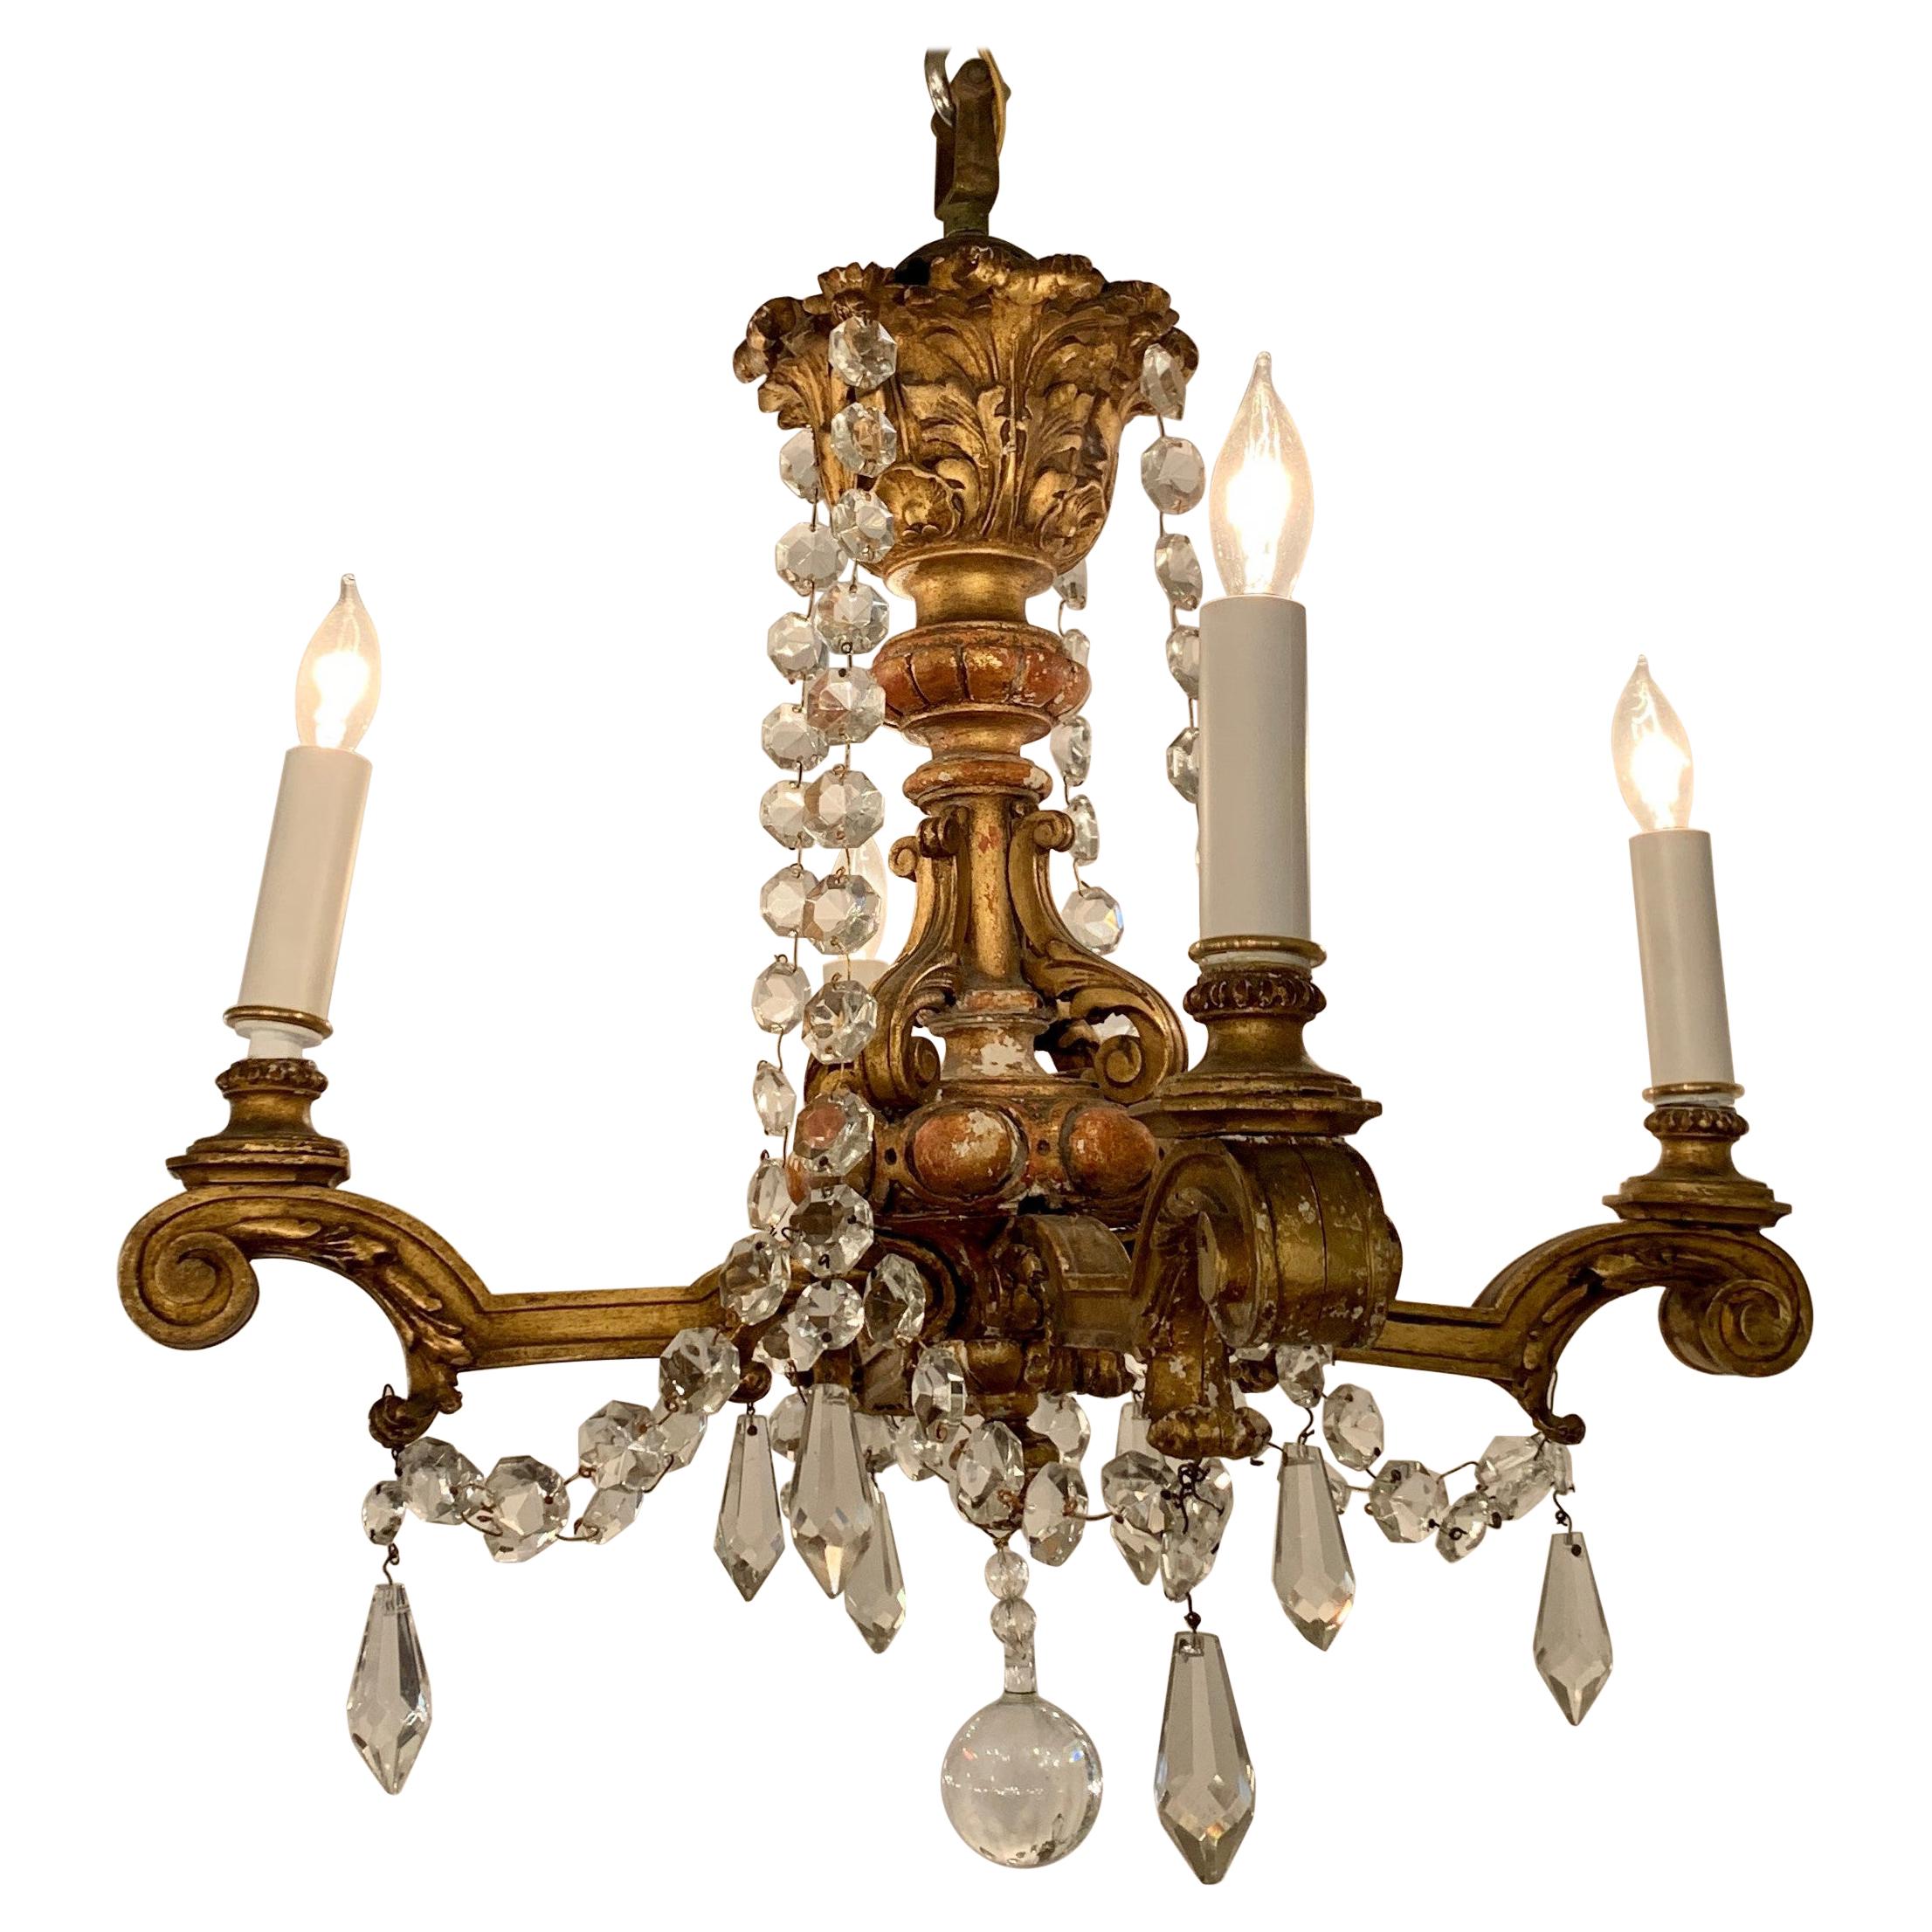 Antique Italian Carved Wood and Gesso Crystal Chandelier, Circa 1920s